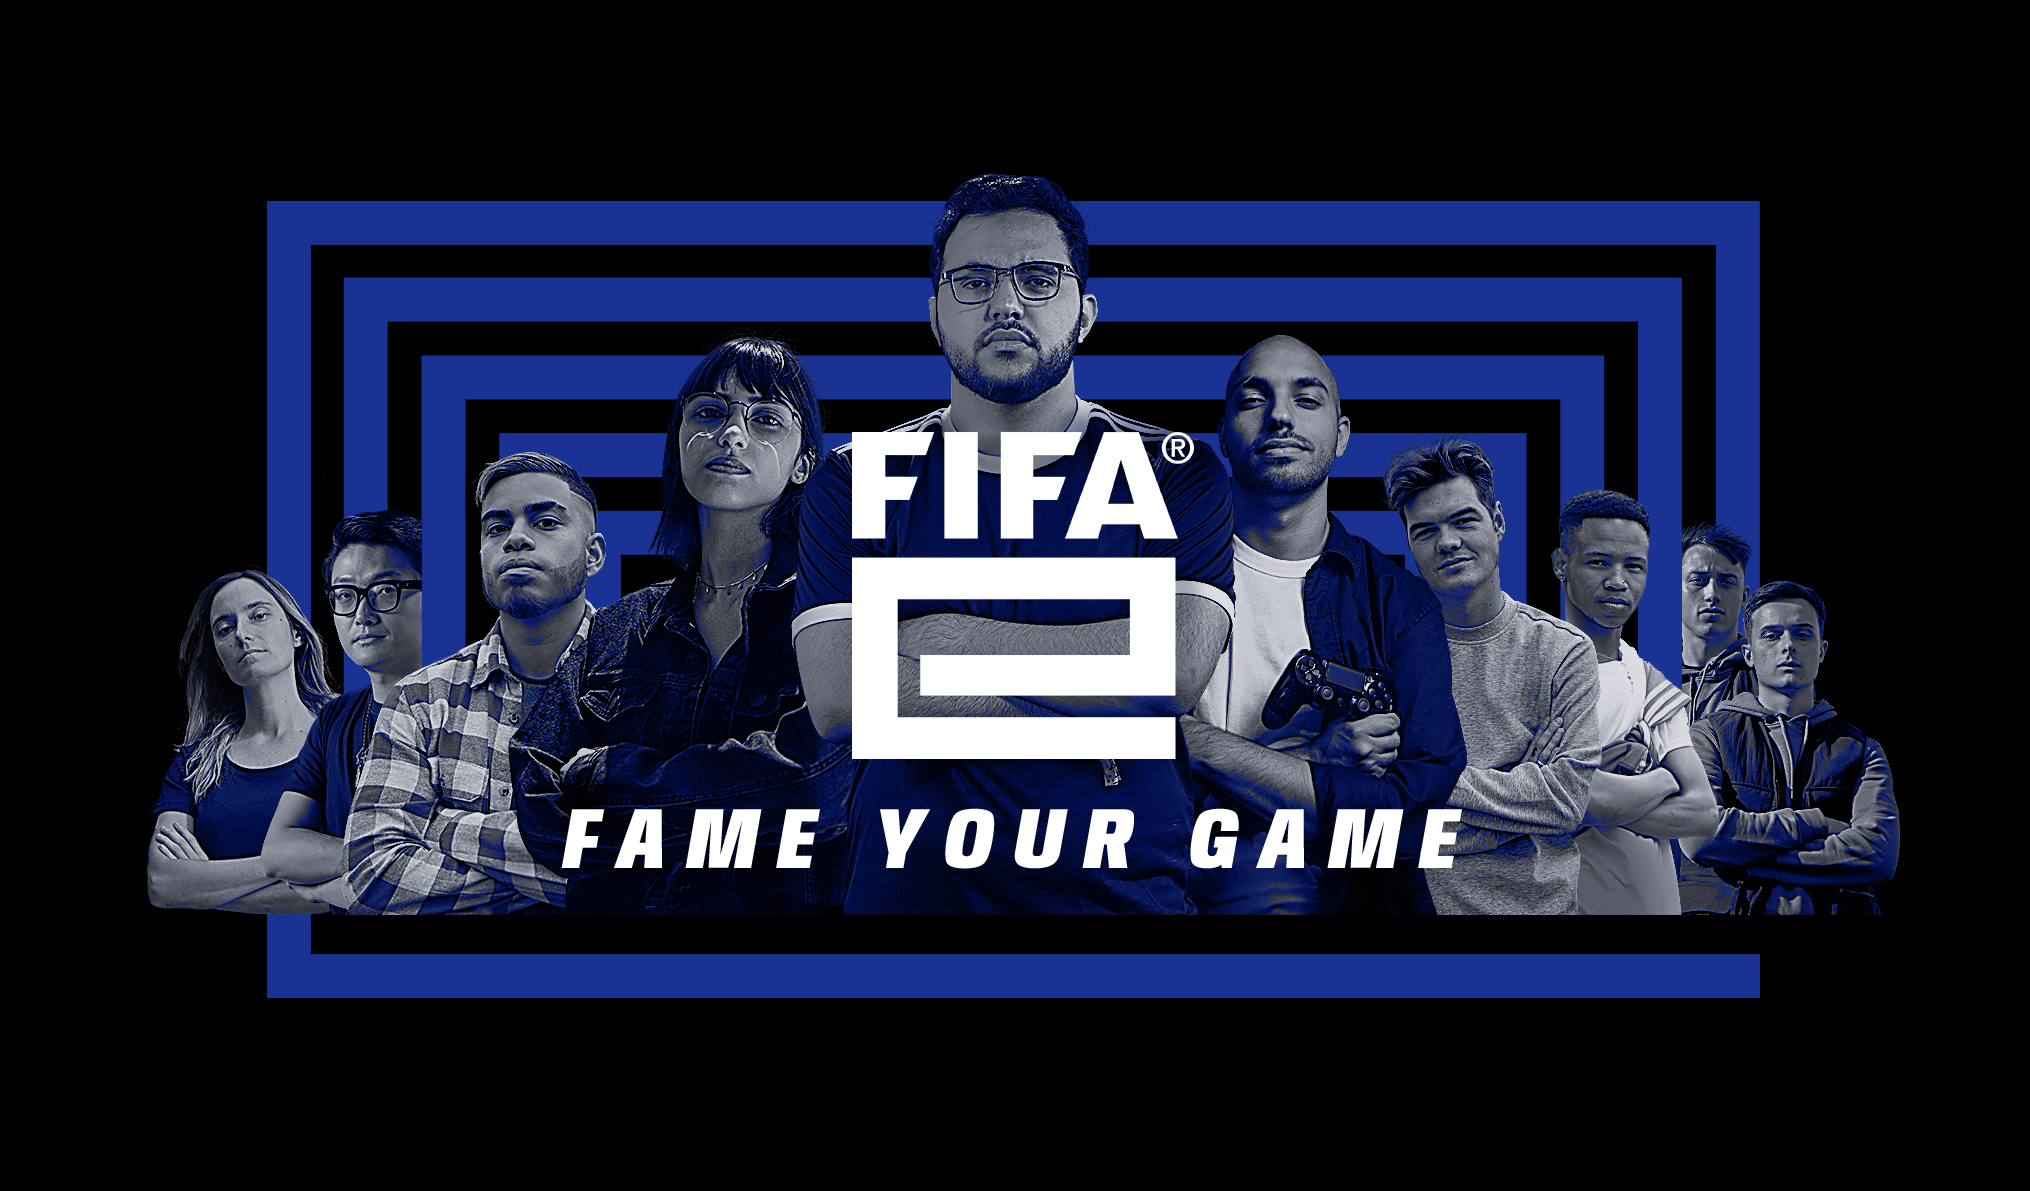 FIFA rebrands its esports and builds prize pool to $4.35m for new season